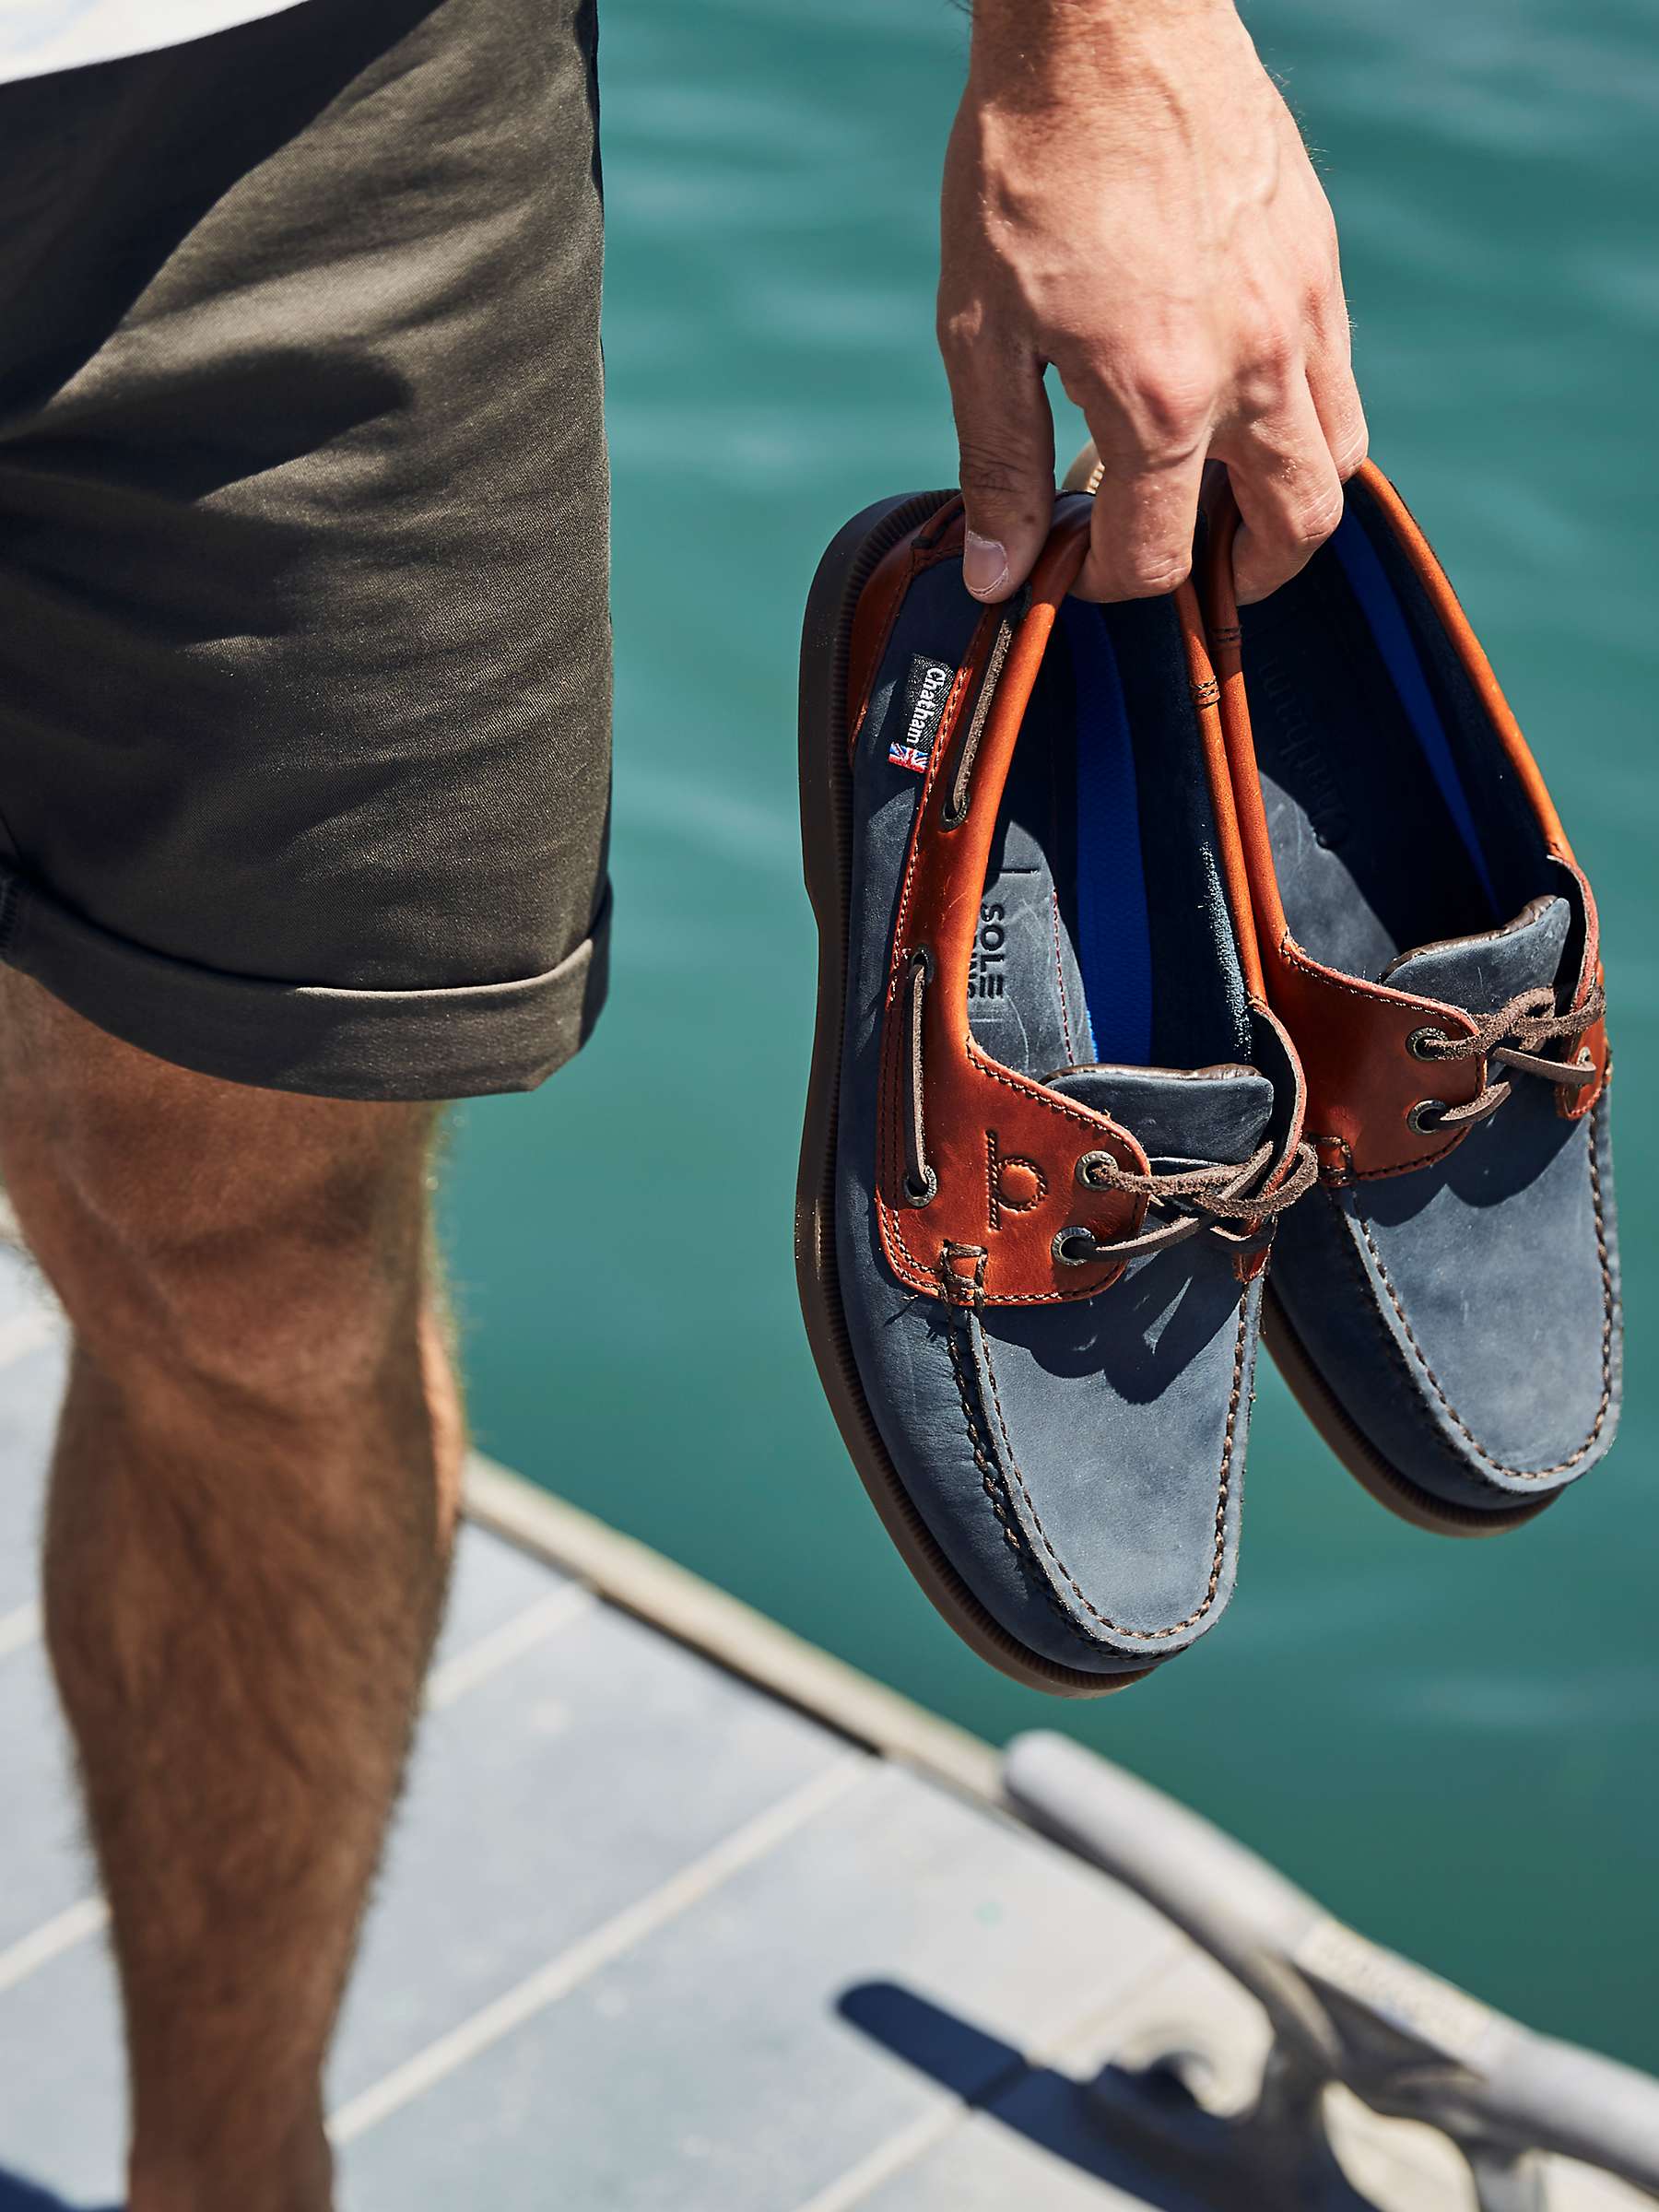 Buy Chatham Bermuda II G2 Leather Boat Shoes, Navy/Seahorse Online at johnlewis.com